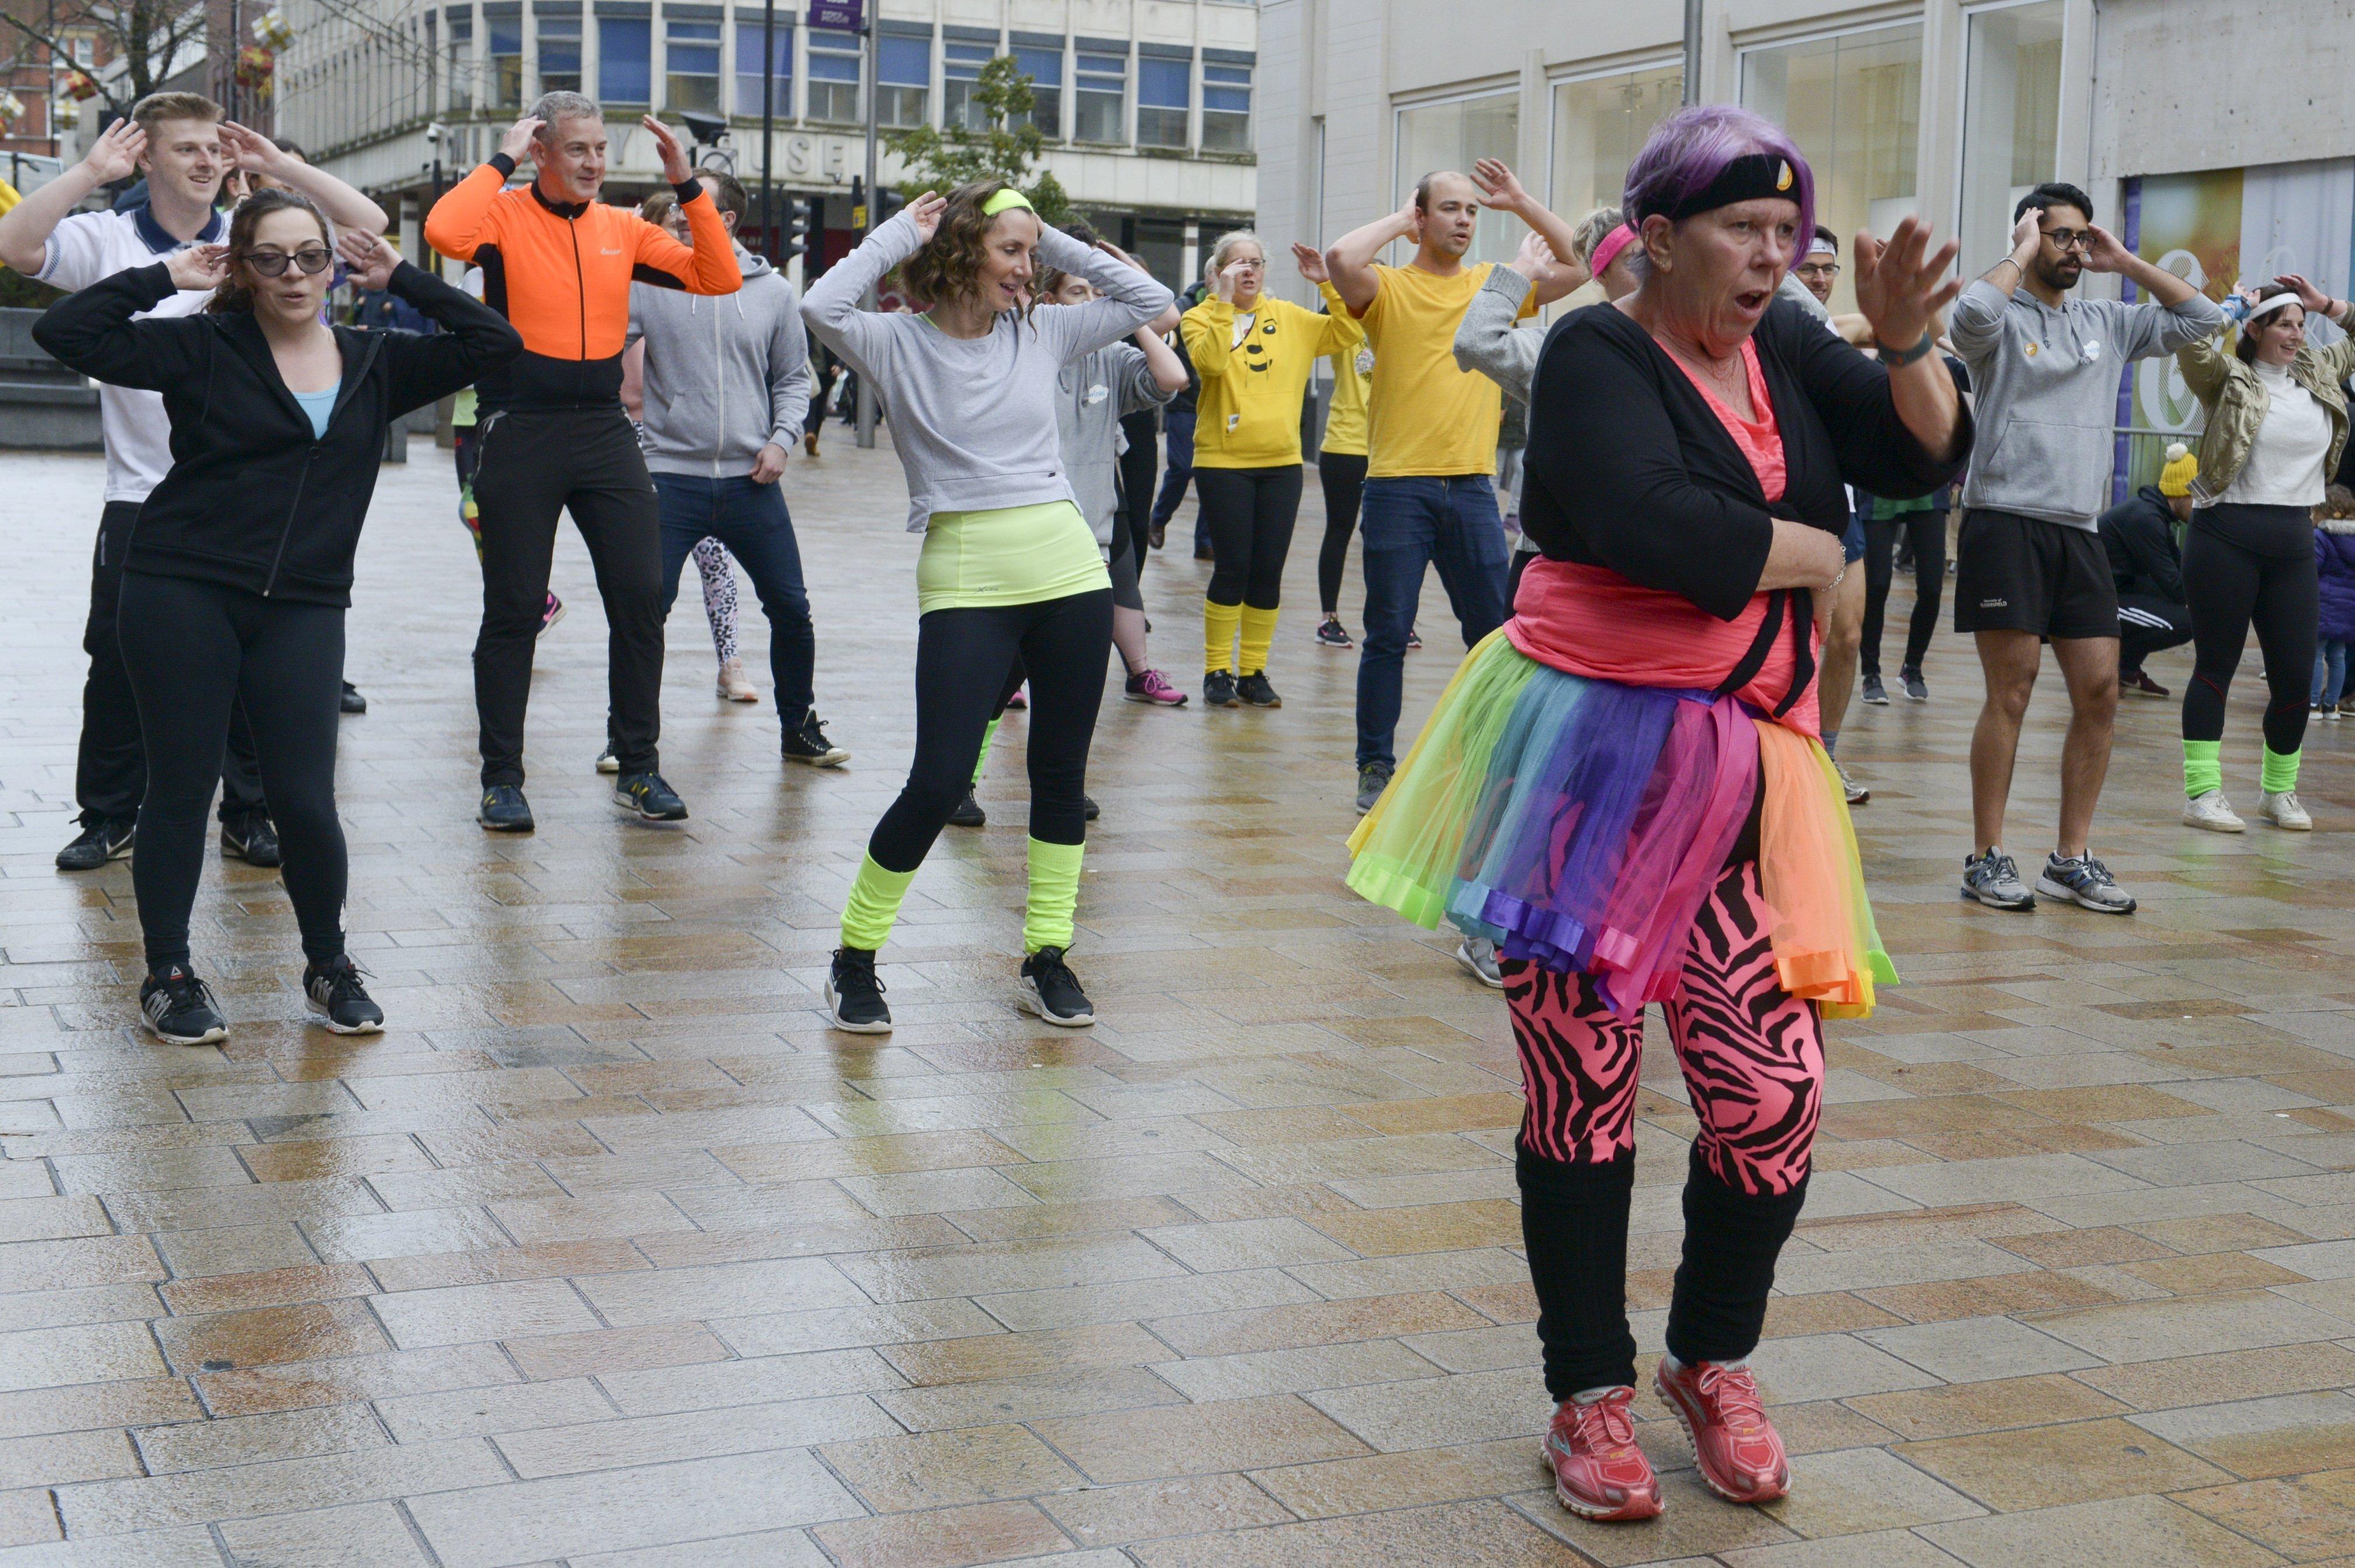 Sheffield city centre shoppers dazzled by 80s-style fitness flash mob in aid of Children in Need - The Star